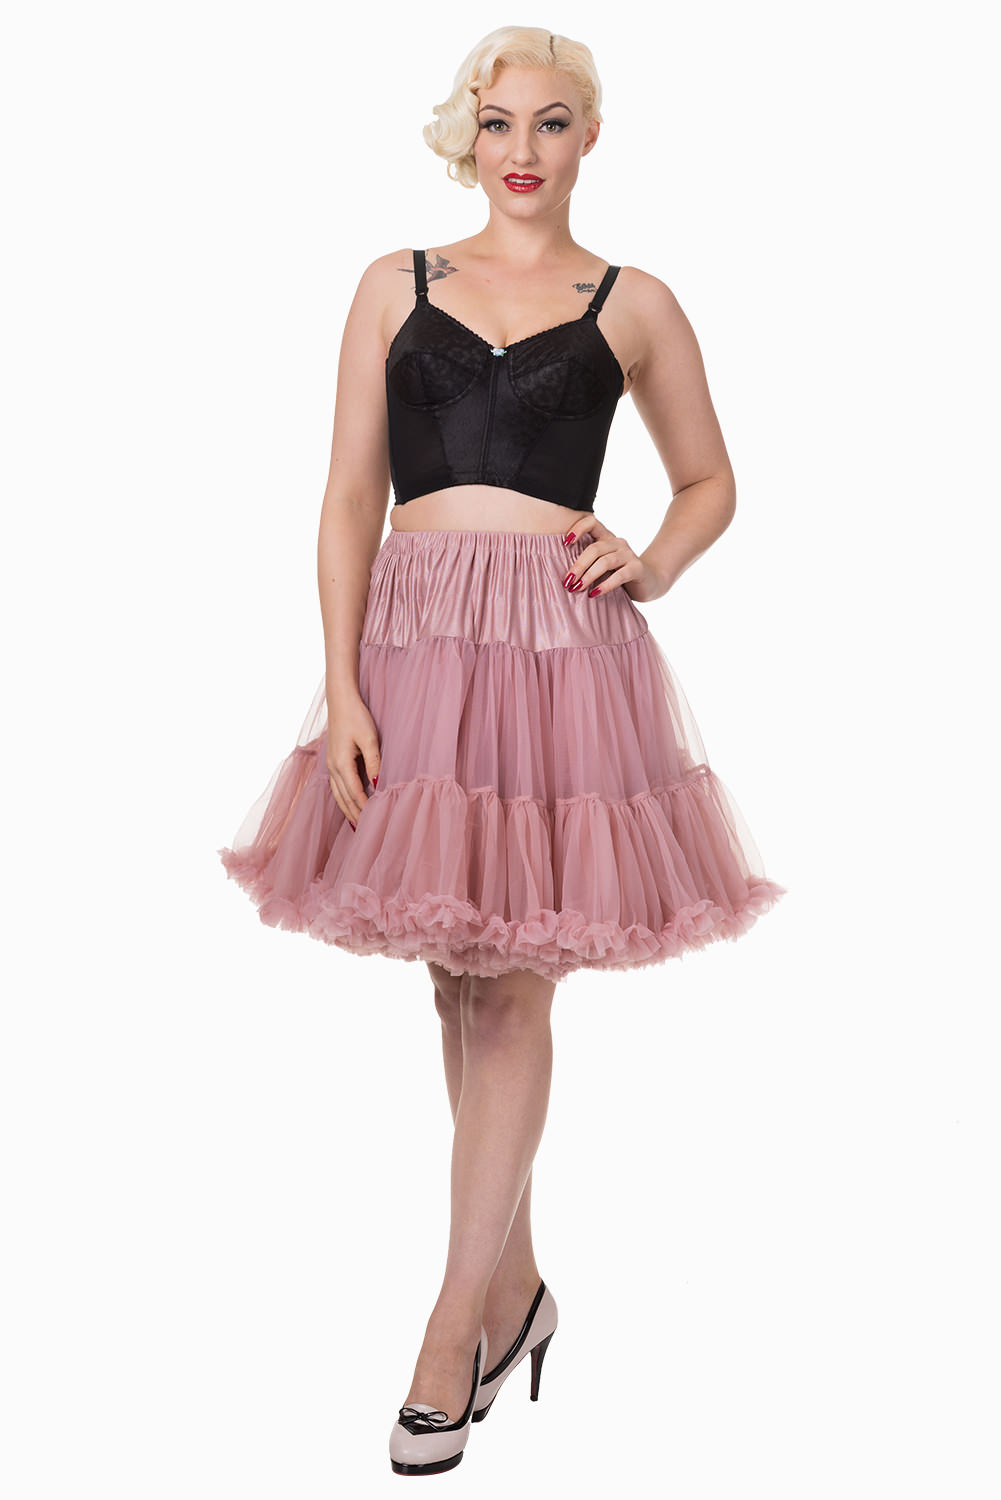 Banned Retro 50s Walkabout Dusty Pink Petticoat